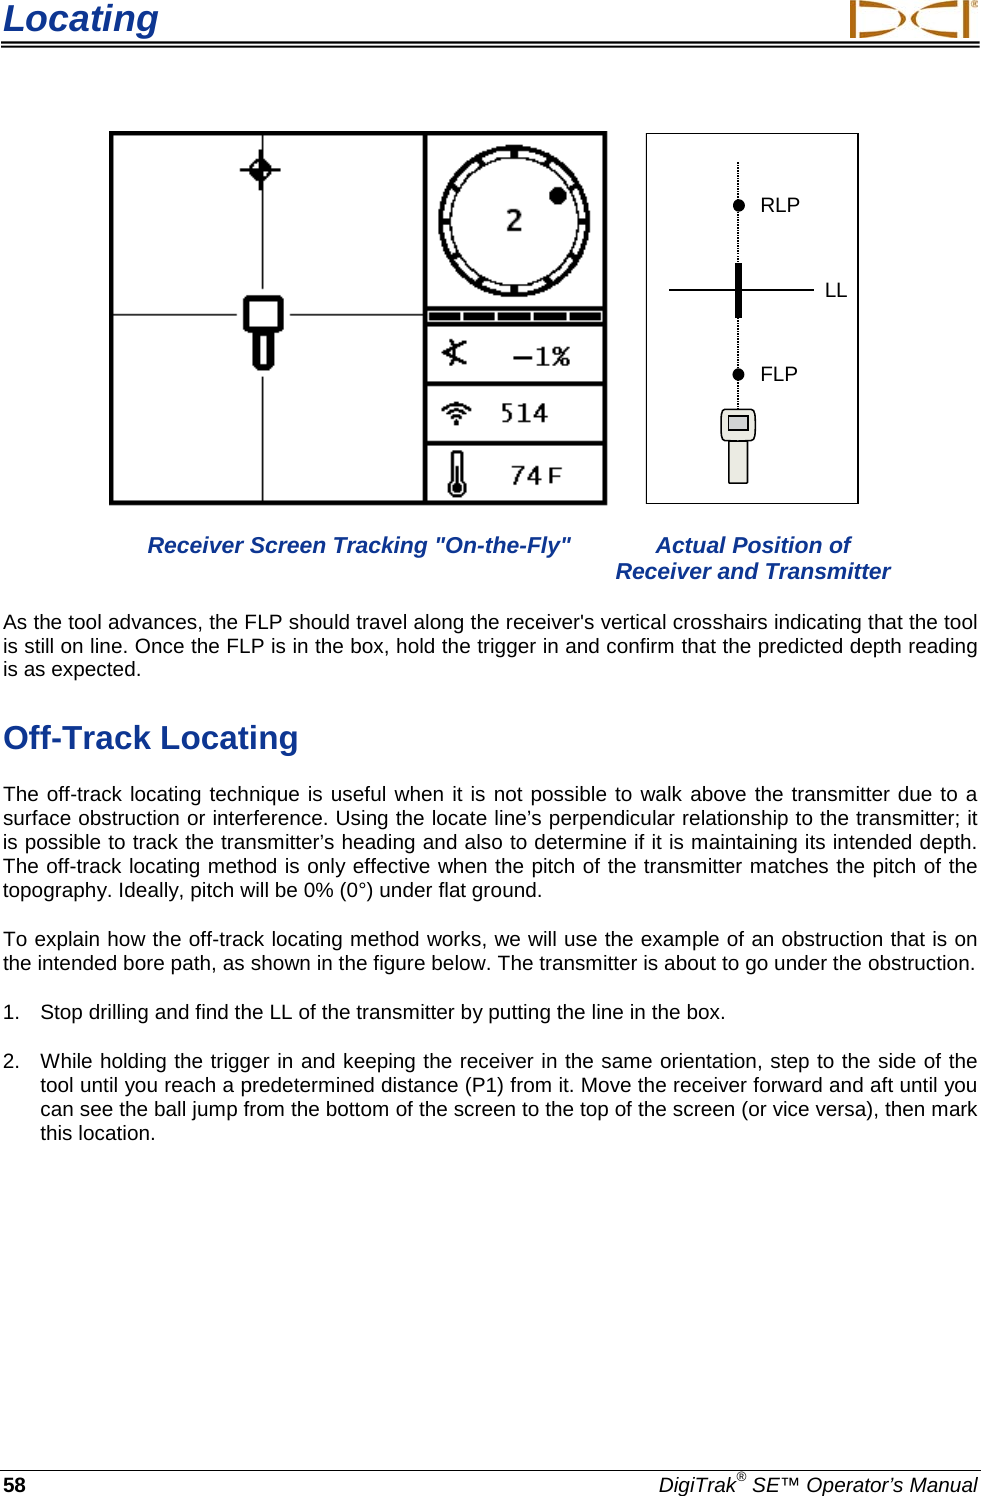 Locating     58 DigiTrak® SE™ Operator’s Manual    RLPFLPLL  Receiver Screen Tracking &quot;On-the-Fly&quot; Actual Position of        Receiver and Transmitter As the tool advances, the FLP should travel along the receiver&apos;s vertical crosshairs indicating that the tool is still on line. Once the FLP is in the box, hold the trigger in and confirm that the predicted depth reading is as expected. Off-Track Locating The off-track locating technique is useful when it is not possible to walk above the transmitter due to a surface obstruction or interference. Using the locate line’s perpendicular relationship to the transmitter; it is possible to track the transmitter’s heading and also to determine if it is maintaining its intended depth. The off-track locating method is only effective when the pitch of the transmitter matches the pitch of the topography. Ideally, pitch will be 0% (0°) under flat ground. To explain how the off-track locating method works, we will use the example of an obstruction that is on the intended bore path, as shown in the figure below. The transmitter is about to go under the obstruction. 1. Stop drilling and find the LL of the transmitter by putting the line in the box. 2. While holding the trigger in and keeping the receiver in the same orientation, step to the side of the tool until you reach a predetermined distance (P1) from it. Move the receiver forward and aft until you can see the ball jump from the bottom of the screen to the top of the screen (or vice versa), then mark this location. 